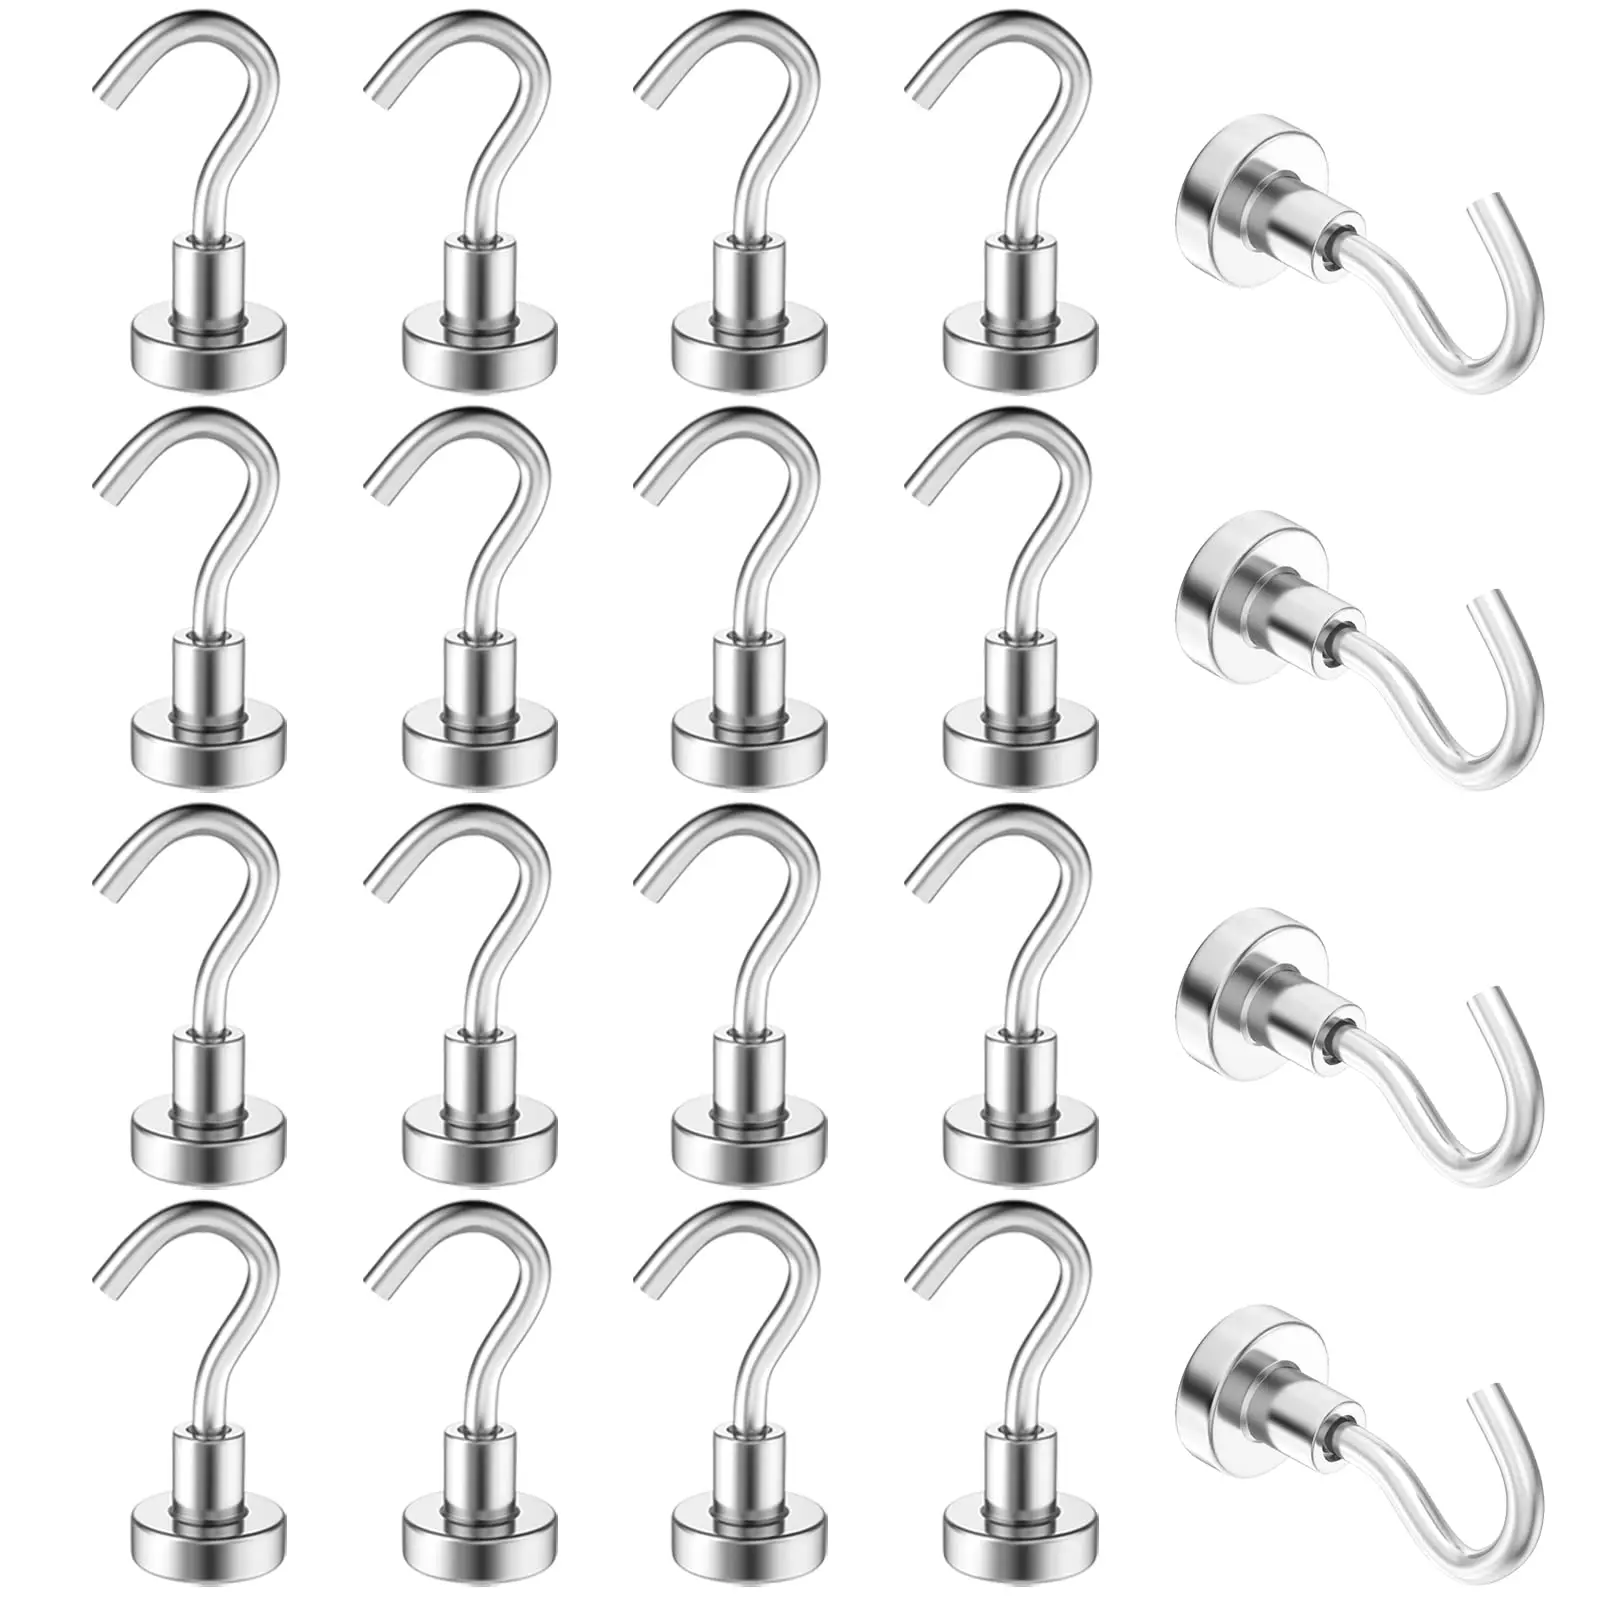 

10 Pcs Magnetic Hooks Neodymium Magnet Heavy Duty Rare Earth Magnet Round Refrigerator Hook Super Strong Cruise Hook for Hanging